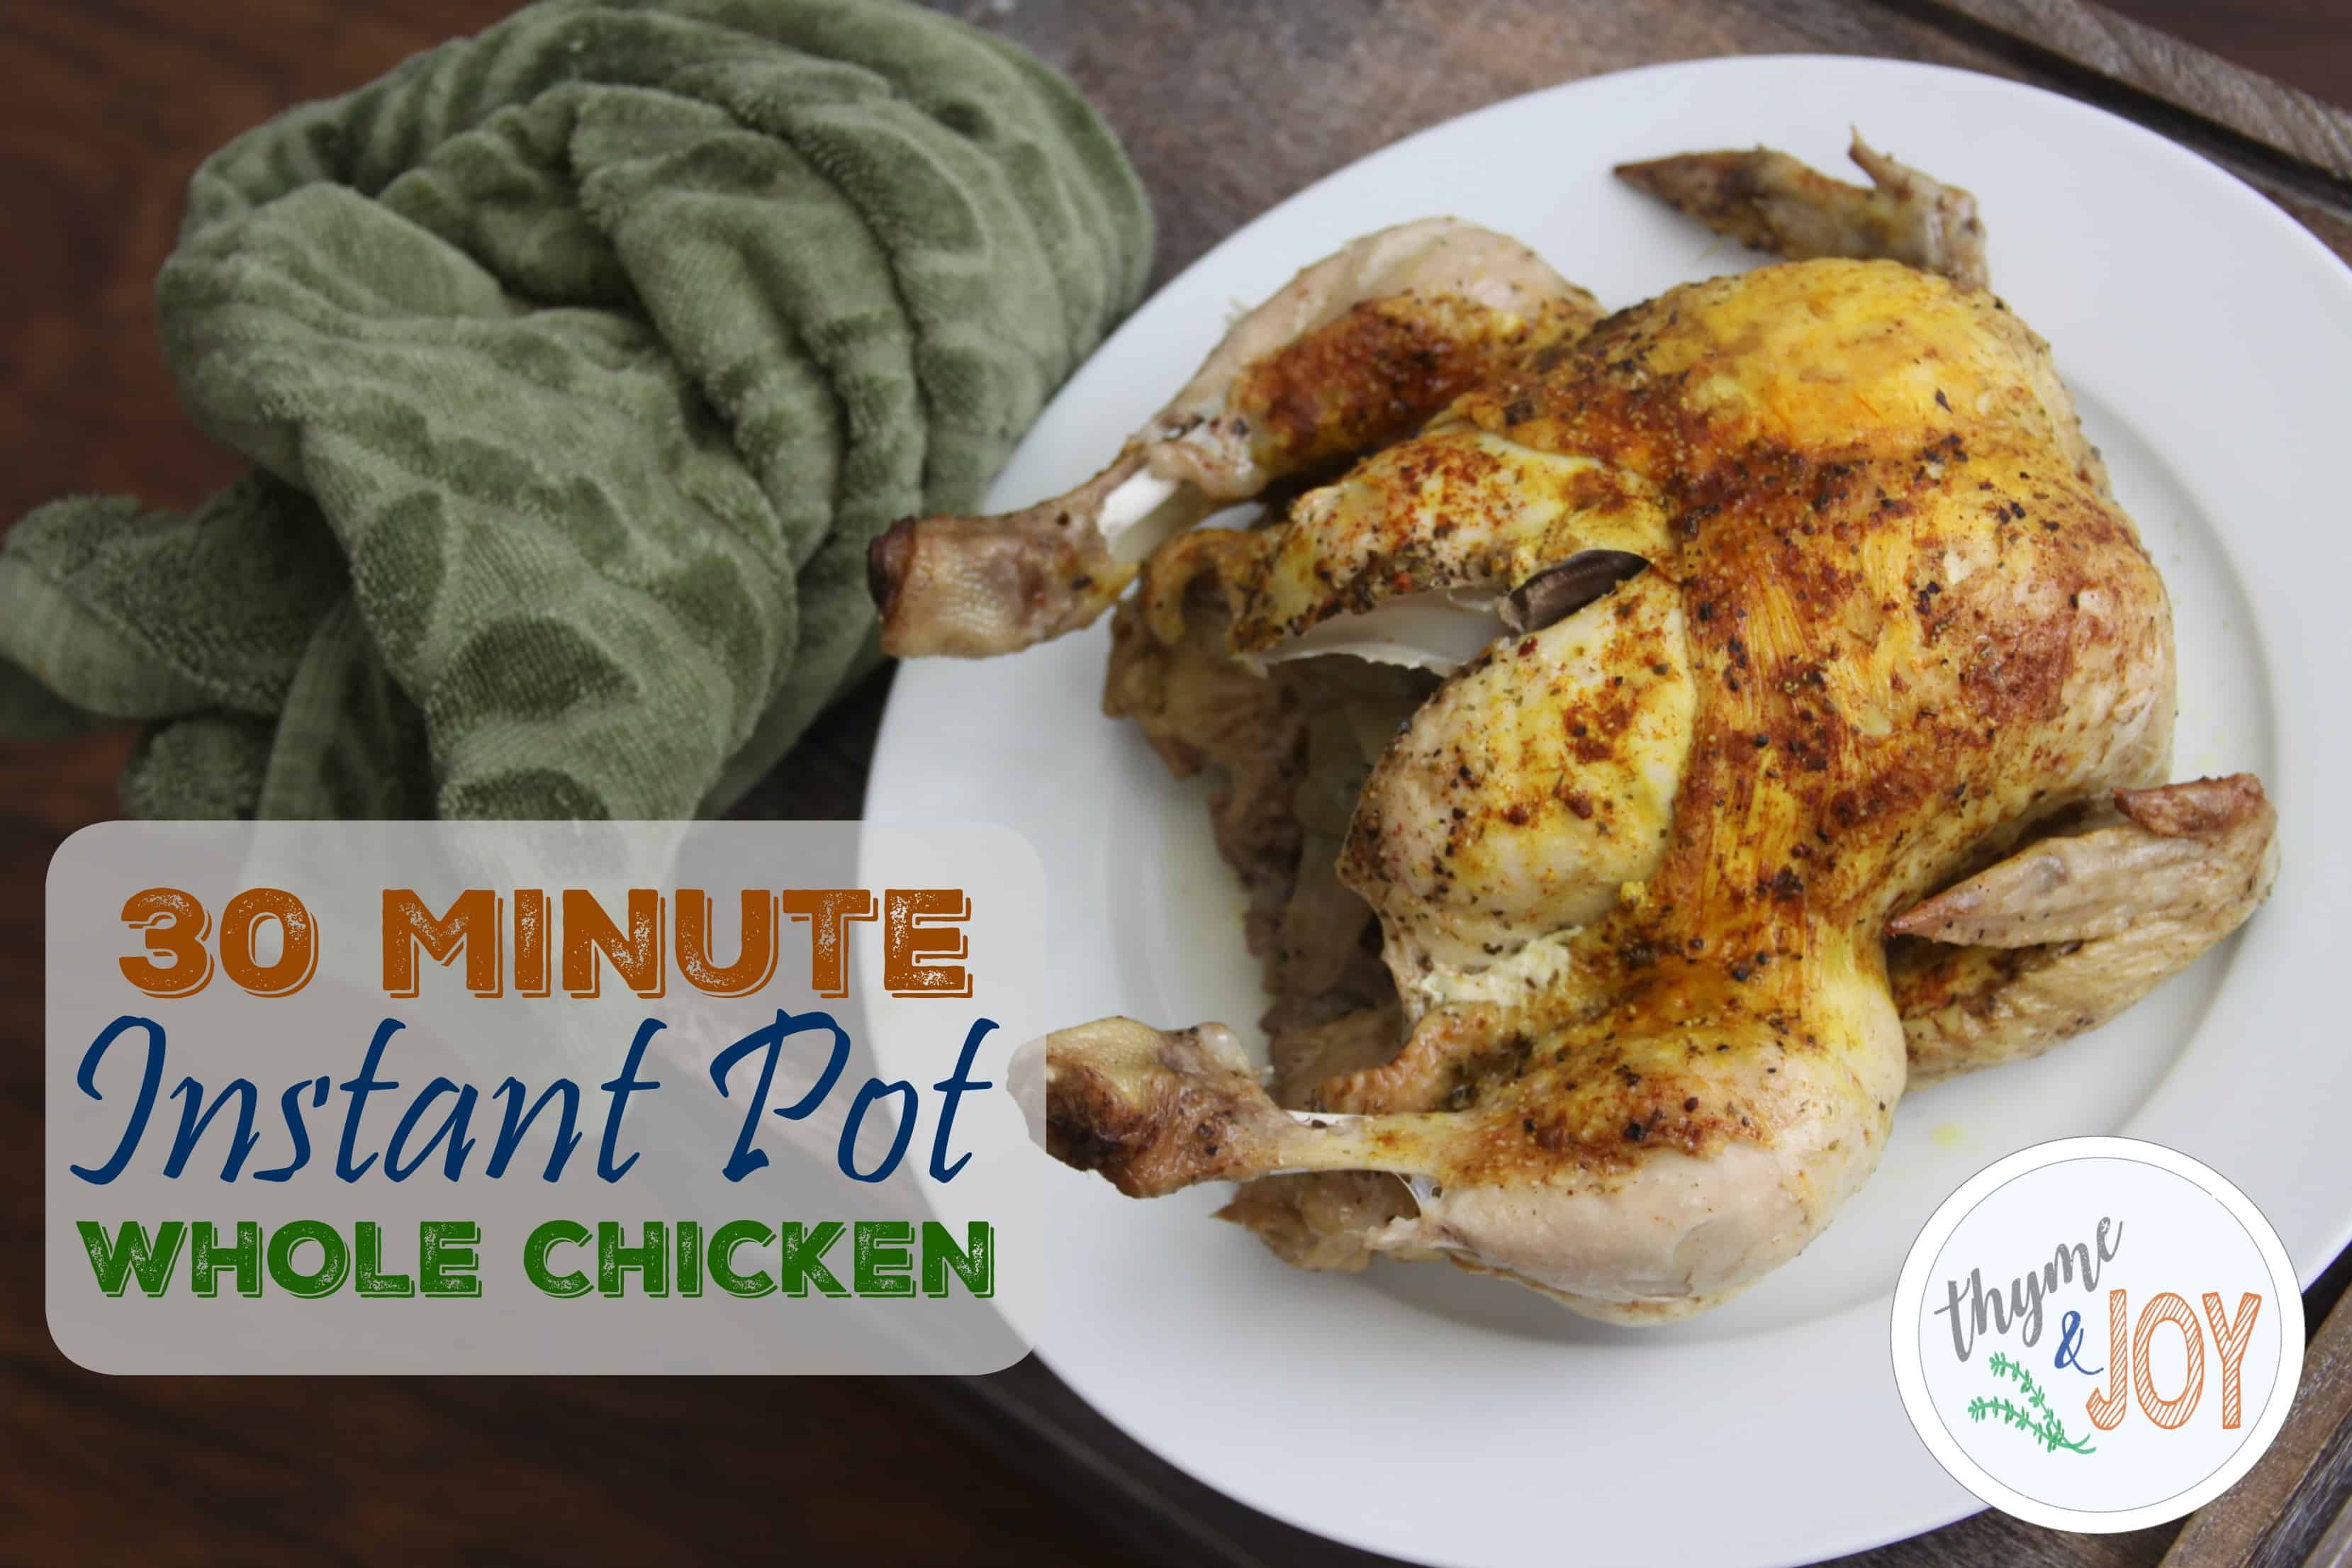 This 30 minute whole chicken can be made just by using an instant pot! This instant pot chicken makes cooking a whole chicken so much easier in the kitchen.